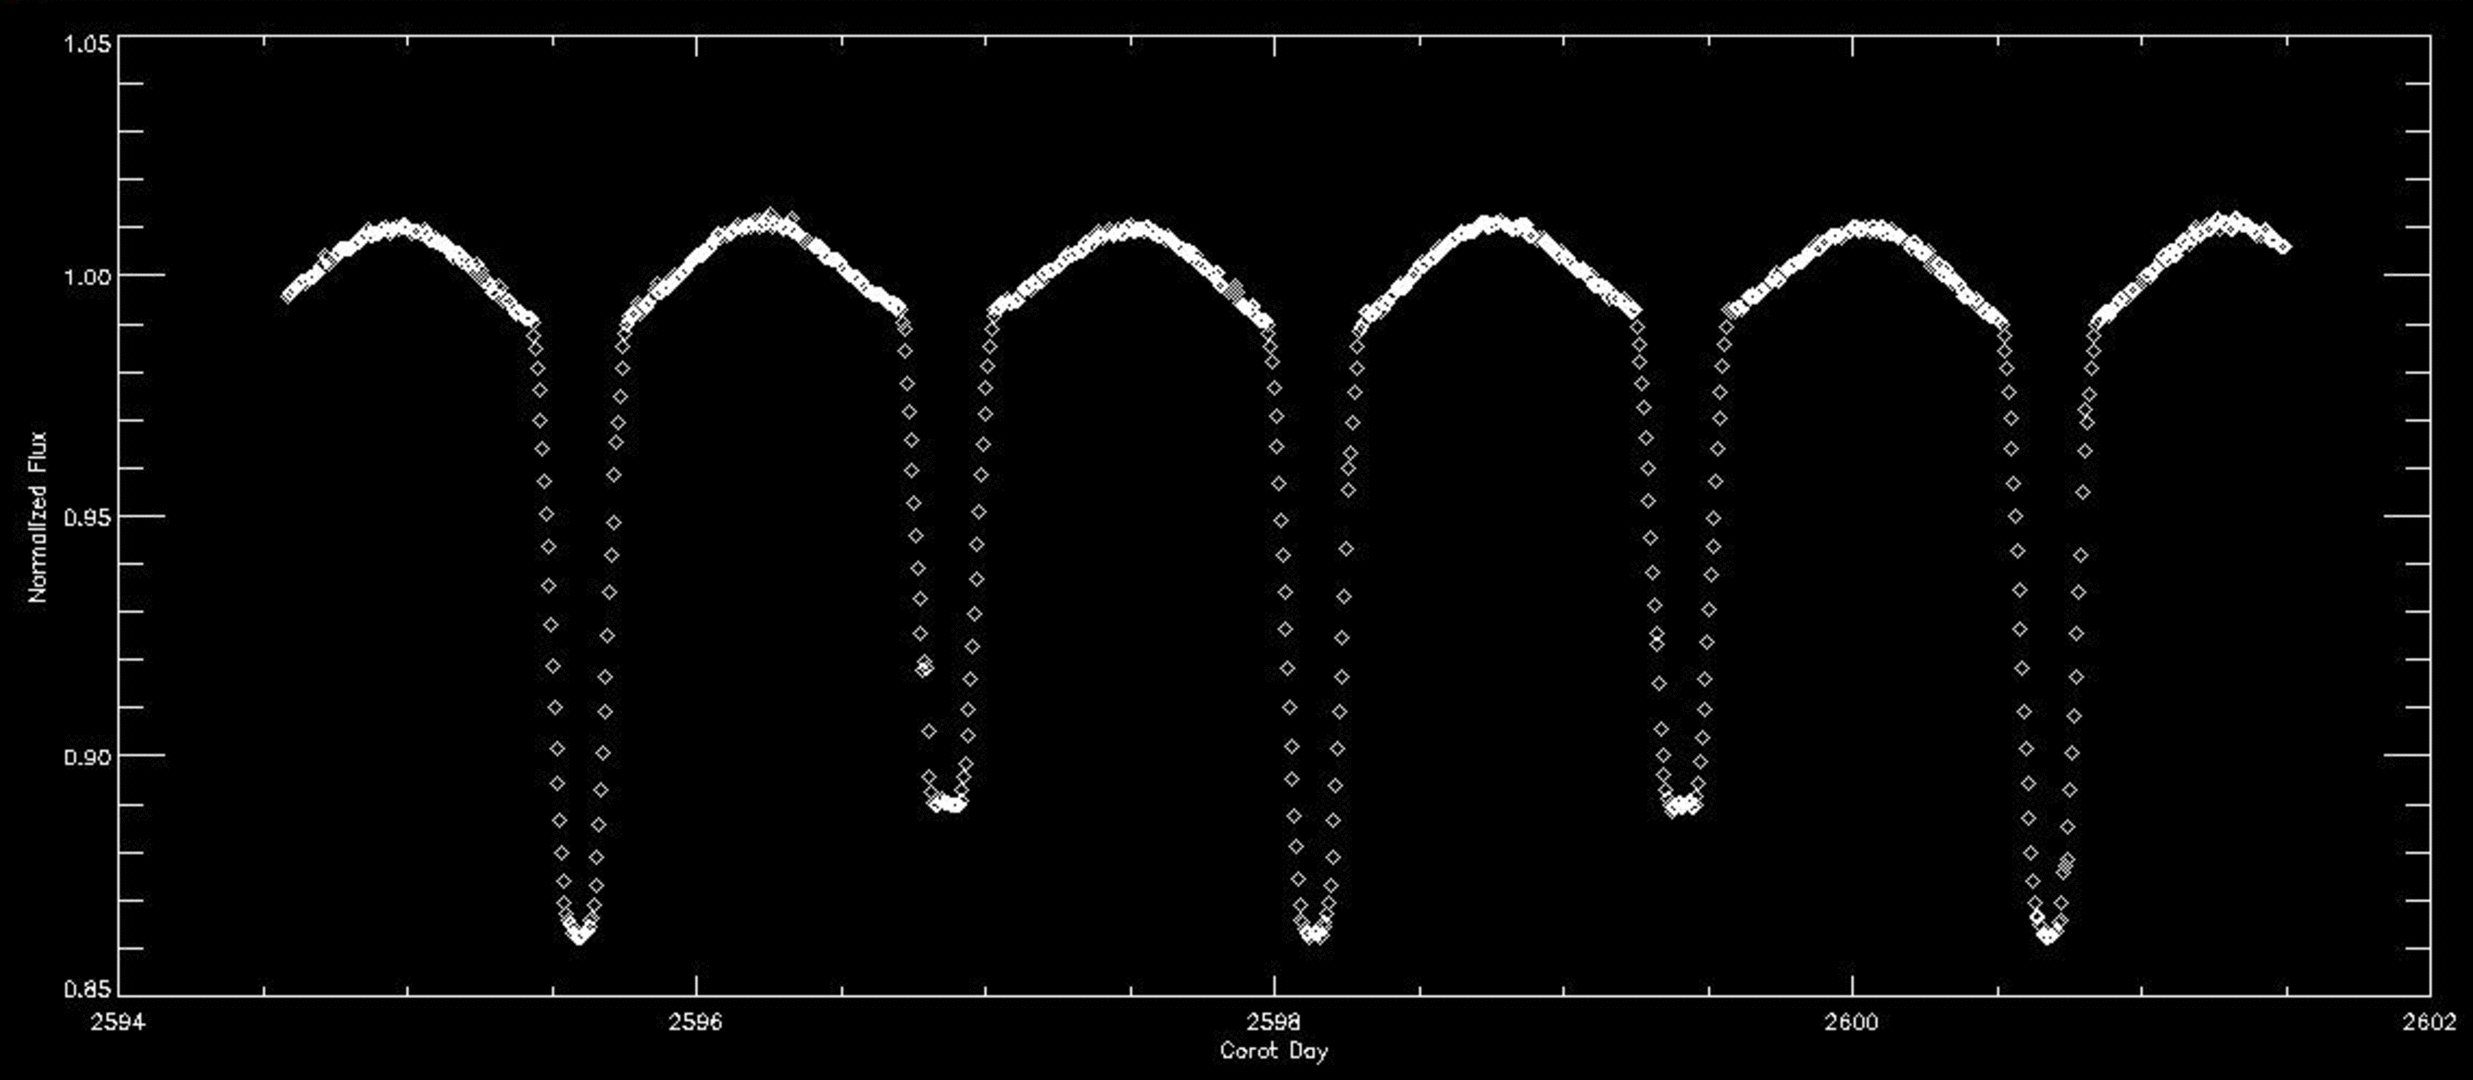 Light curve from a binary star system recorded by COROT